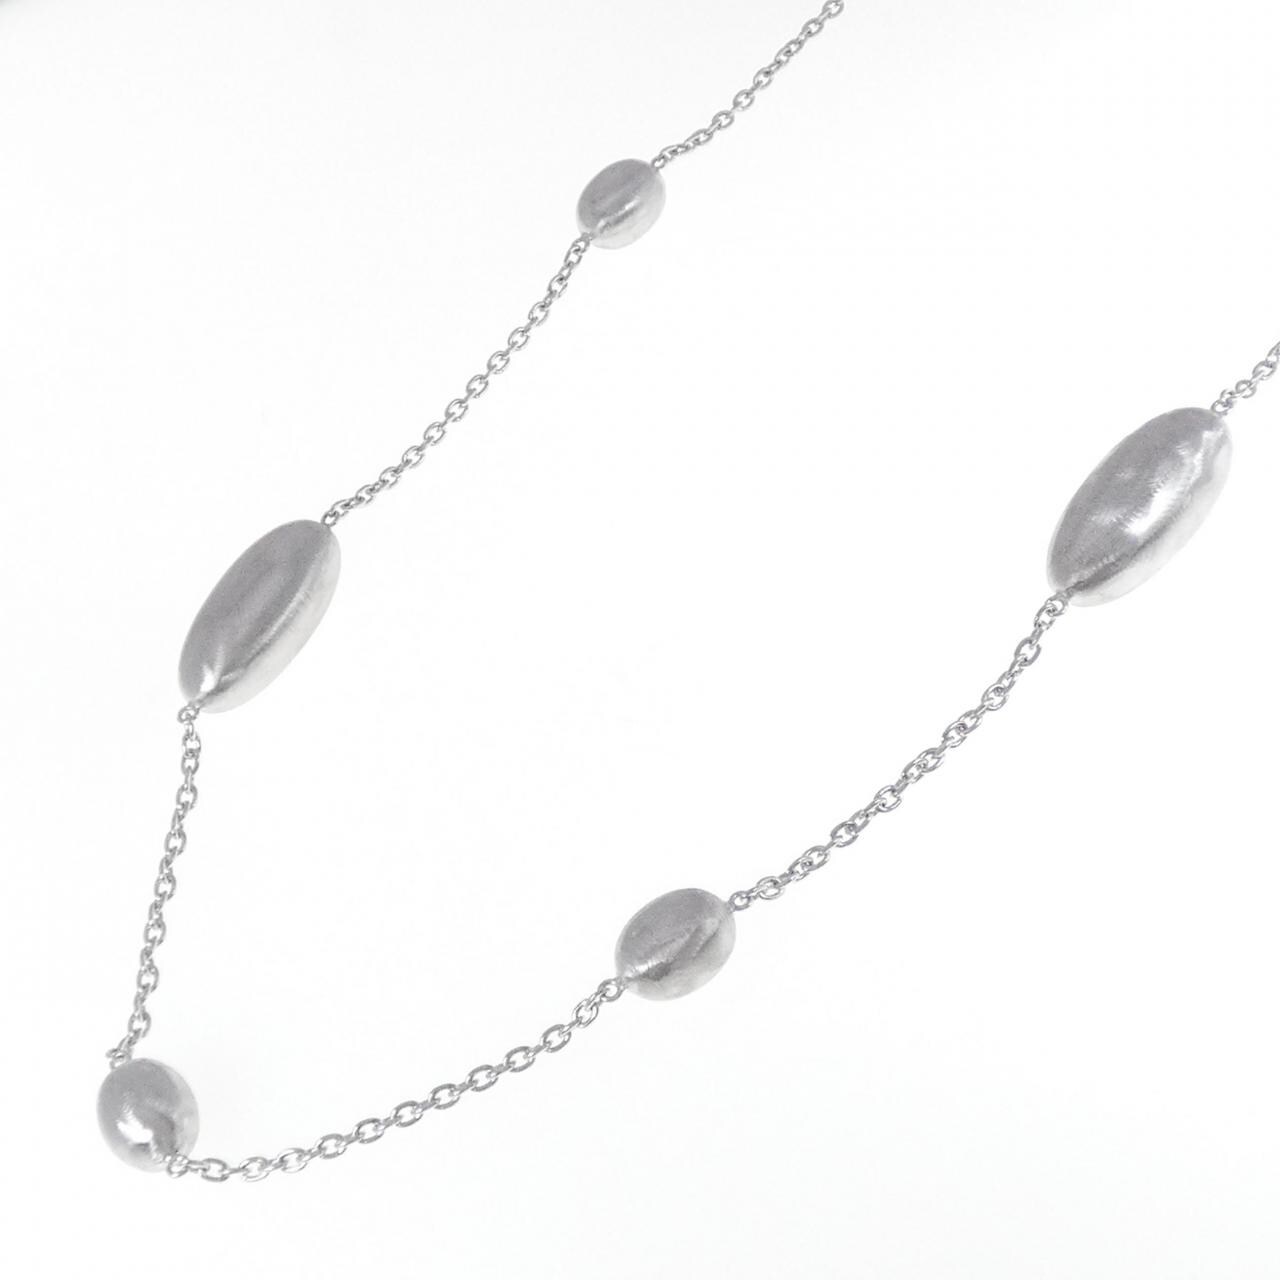 Nanis 925 Silver Necklace